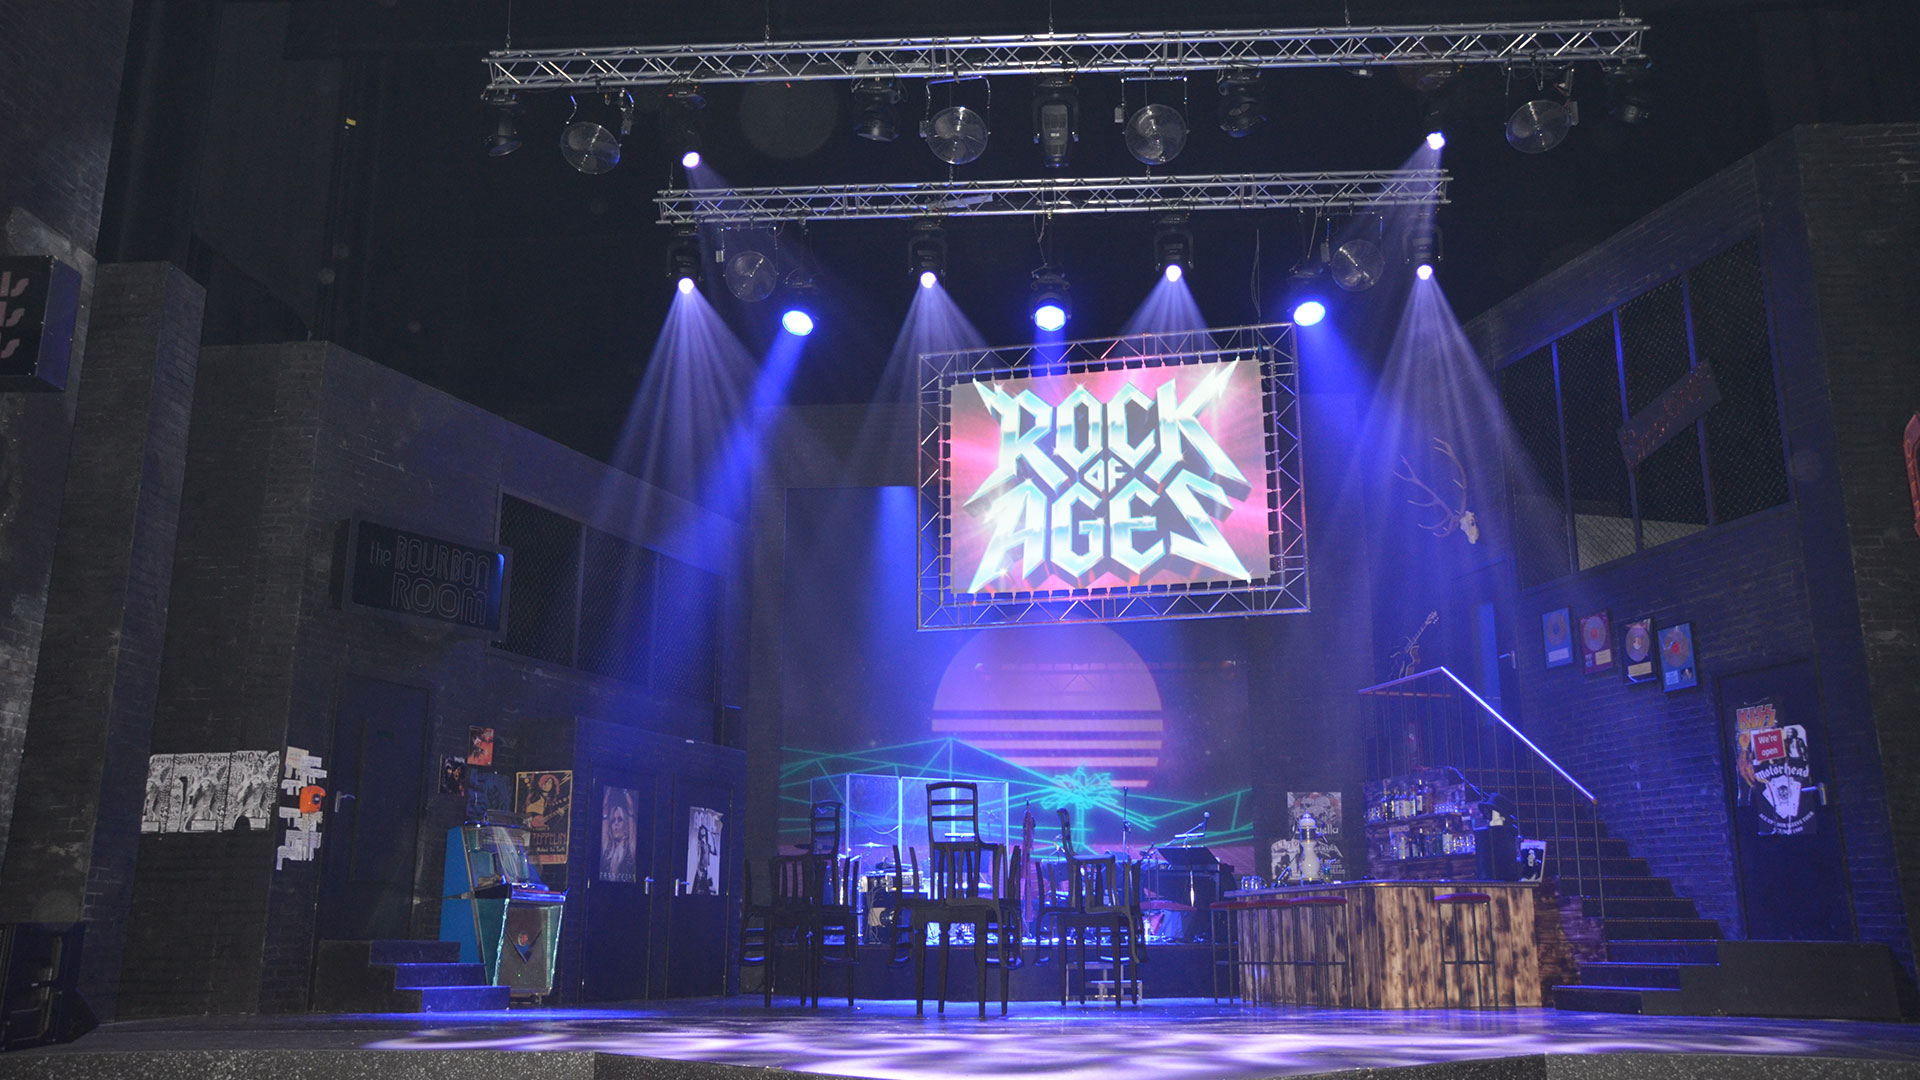 Theater-Ulm_Rock_of_Ages_P18_2.jpg